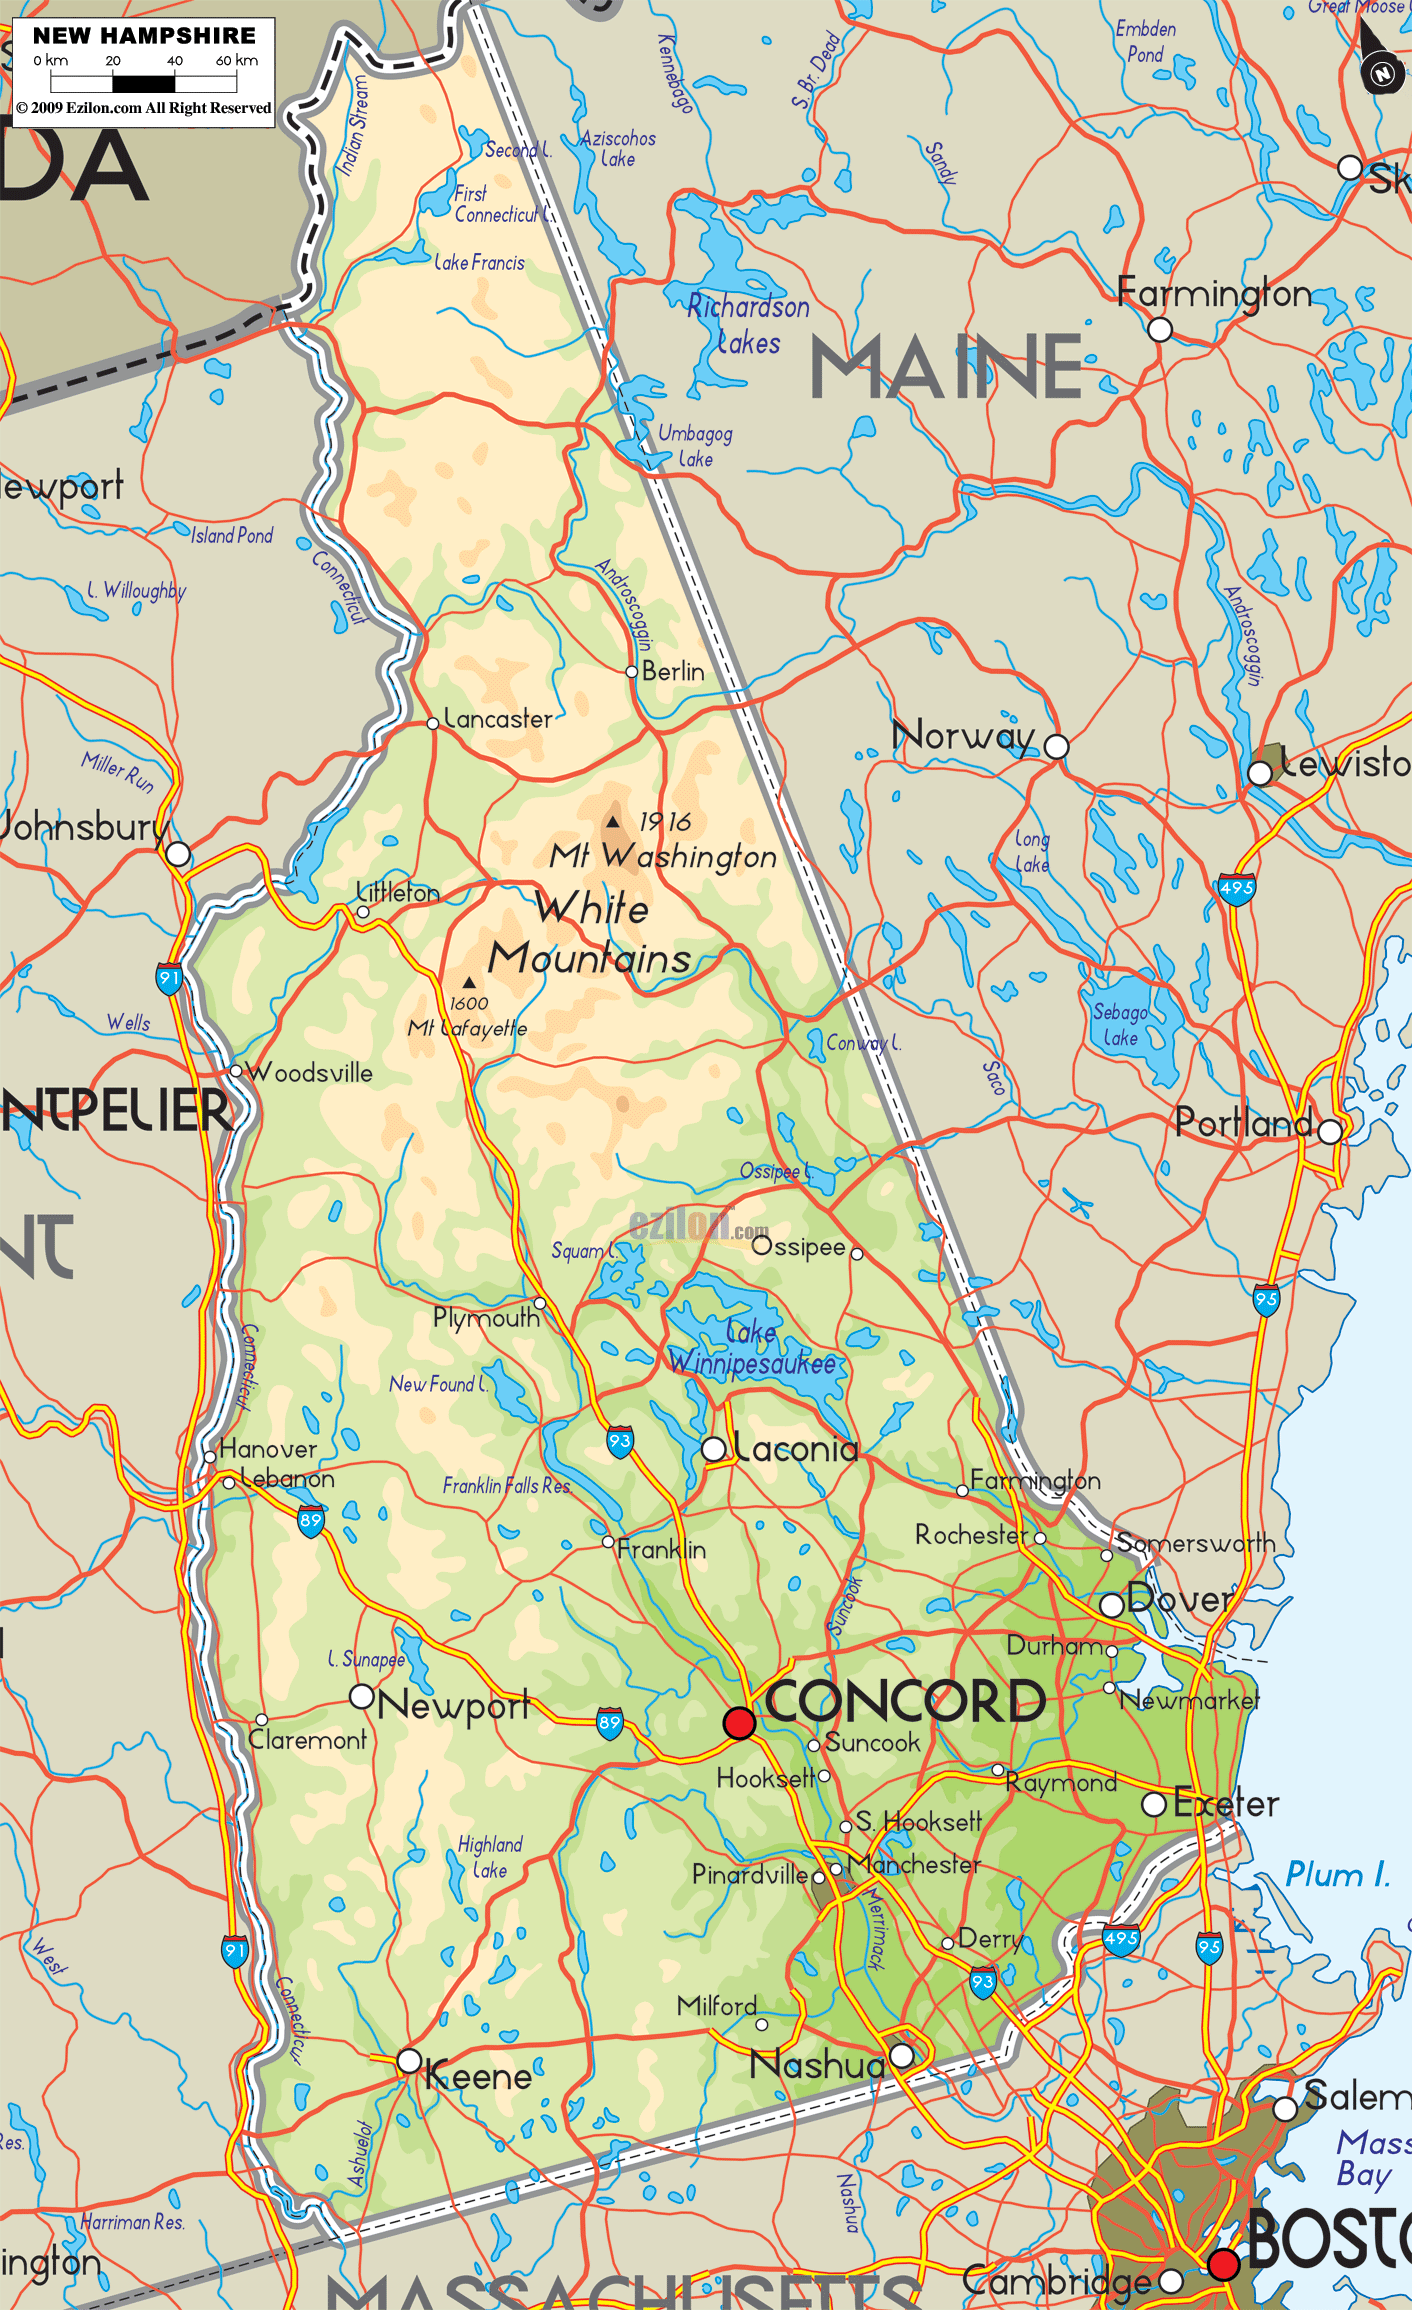 Large Detailed Physical map of New Hampshire State, USA showing major geographical features such as rivers, lakes, topography and land formations.